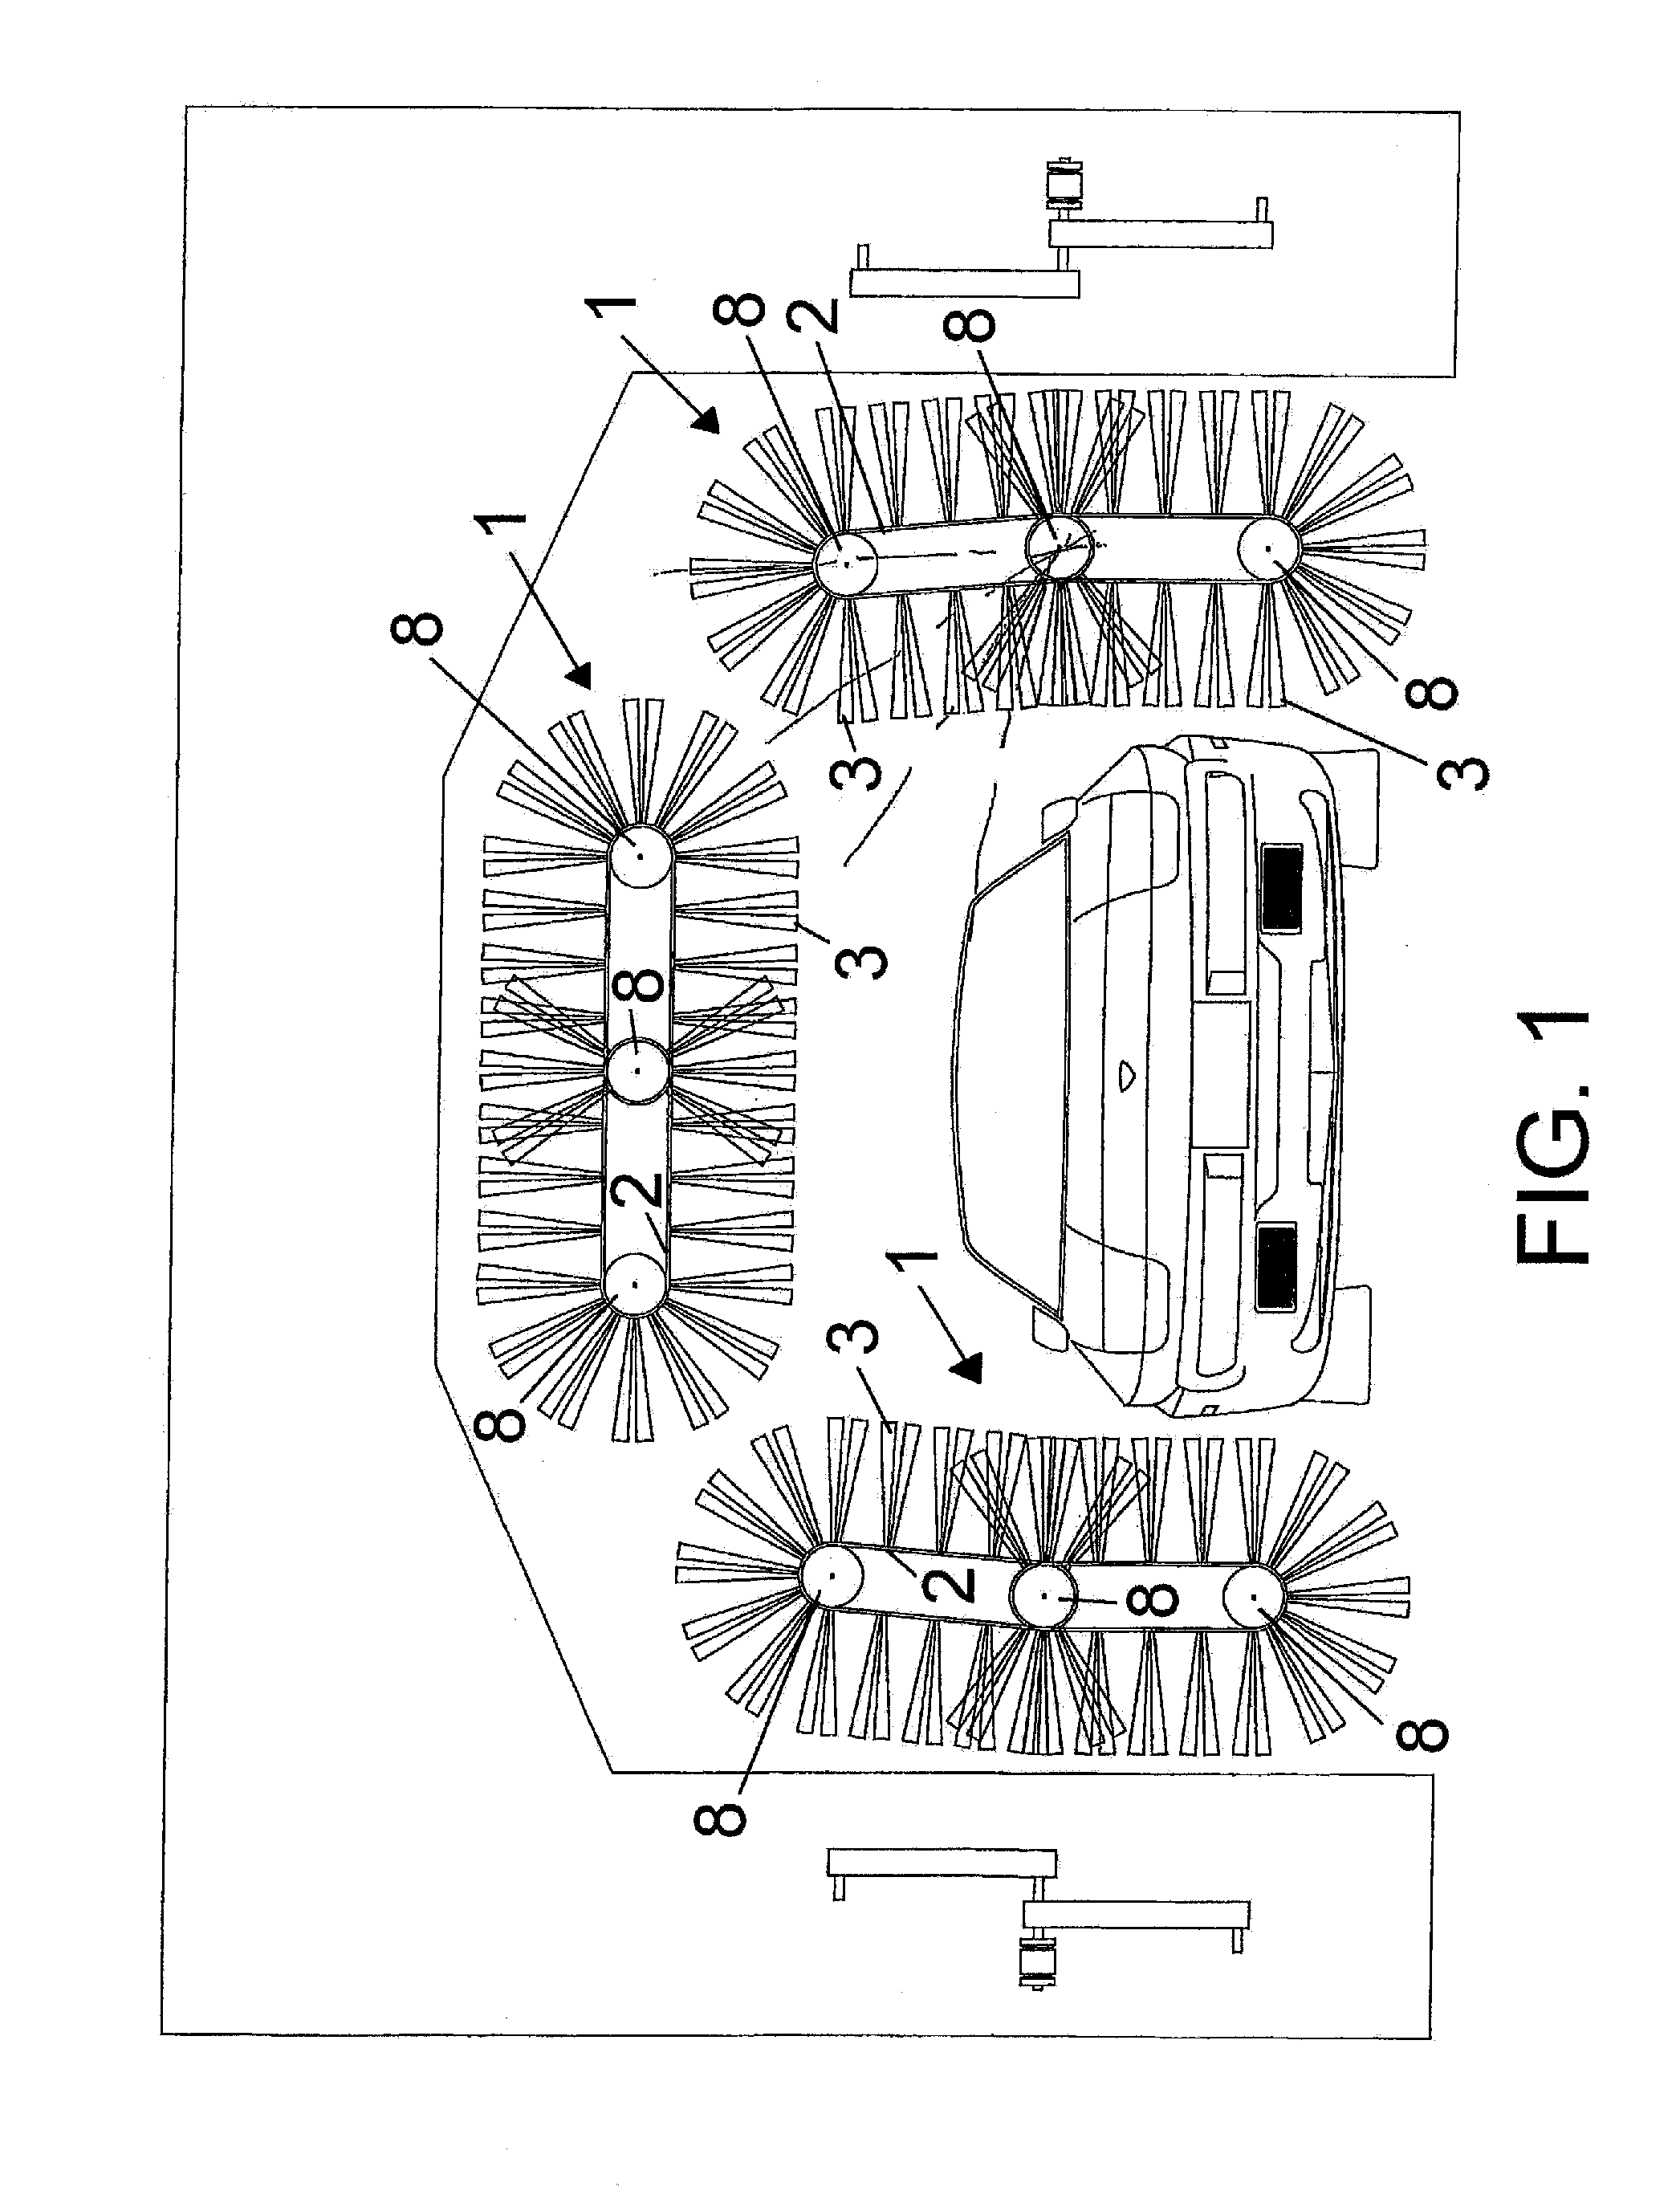 Washing bristle brush for automatic motor vehicle washing systems, including a plurality of endless belt elements entrained at the two portions thereof on entraining rollers driven by electric motors or mechanical driving members